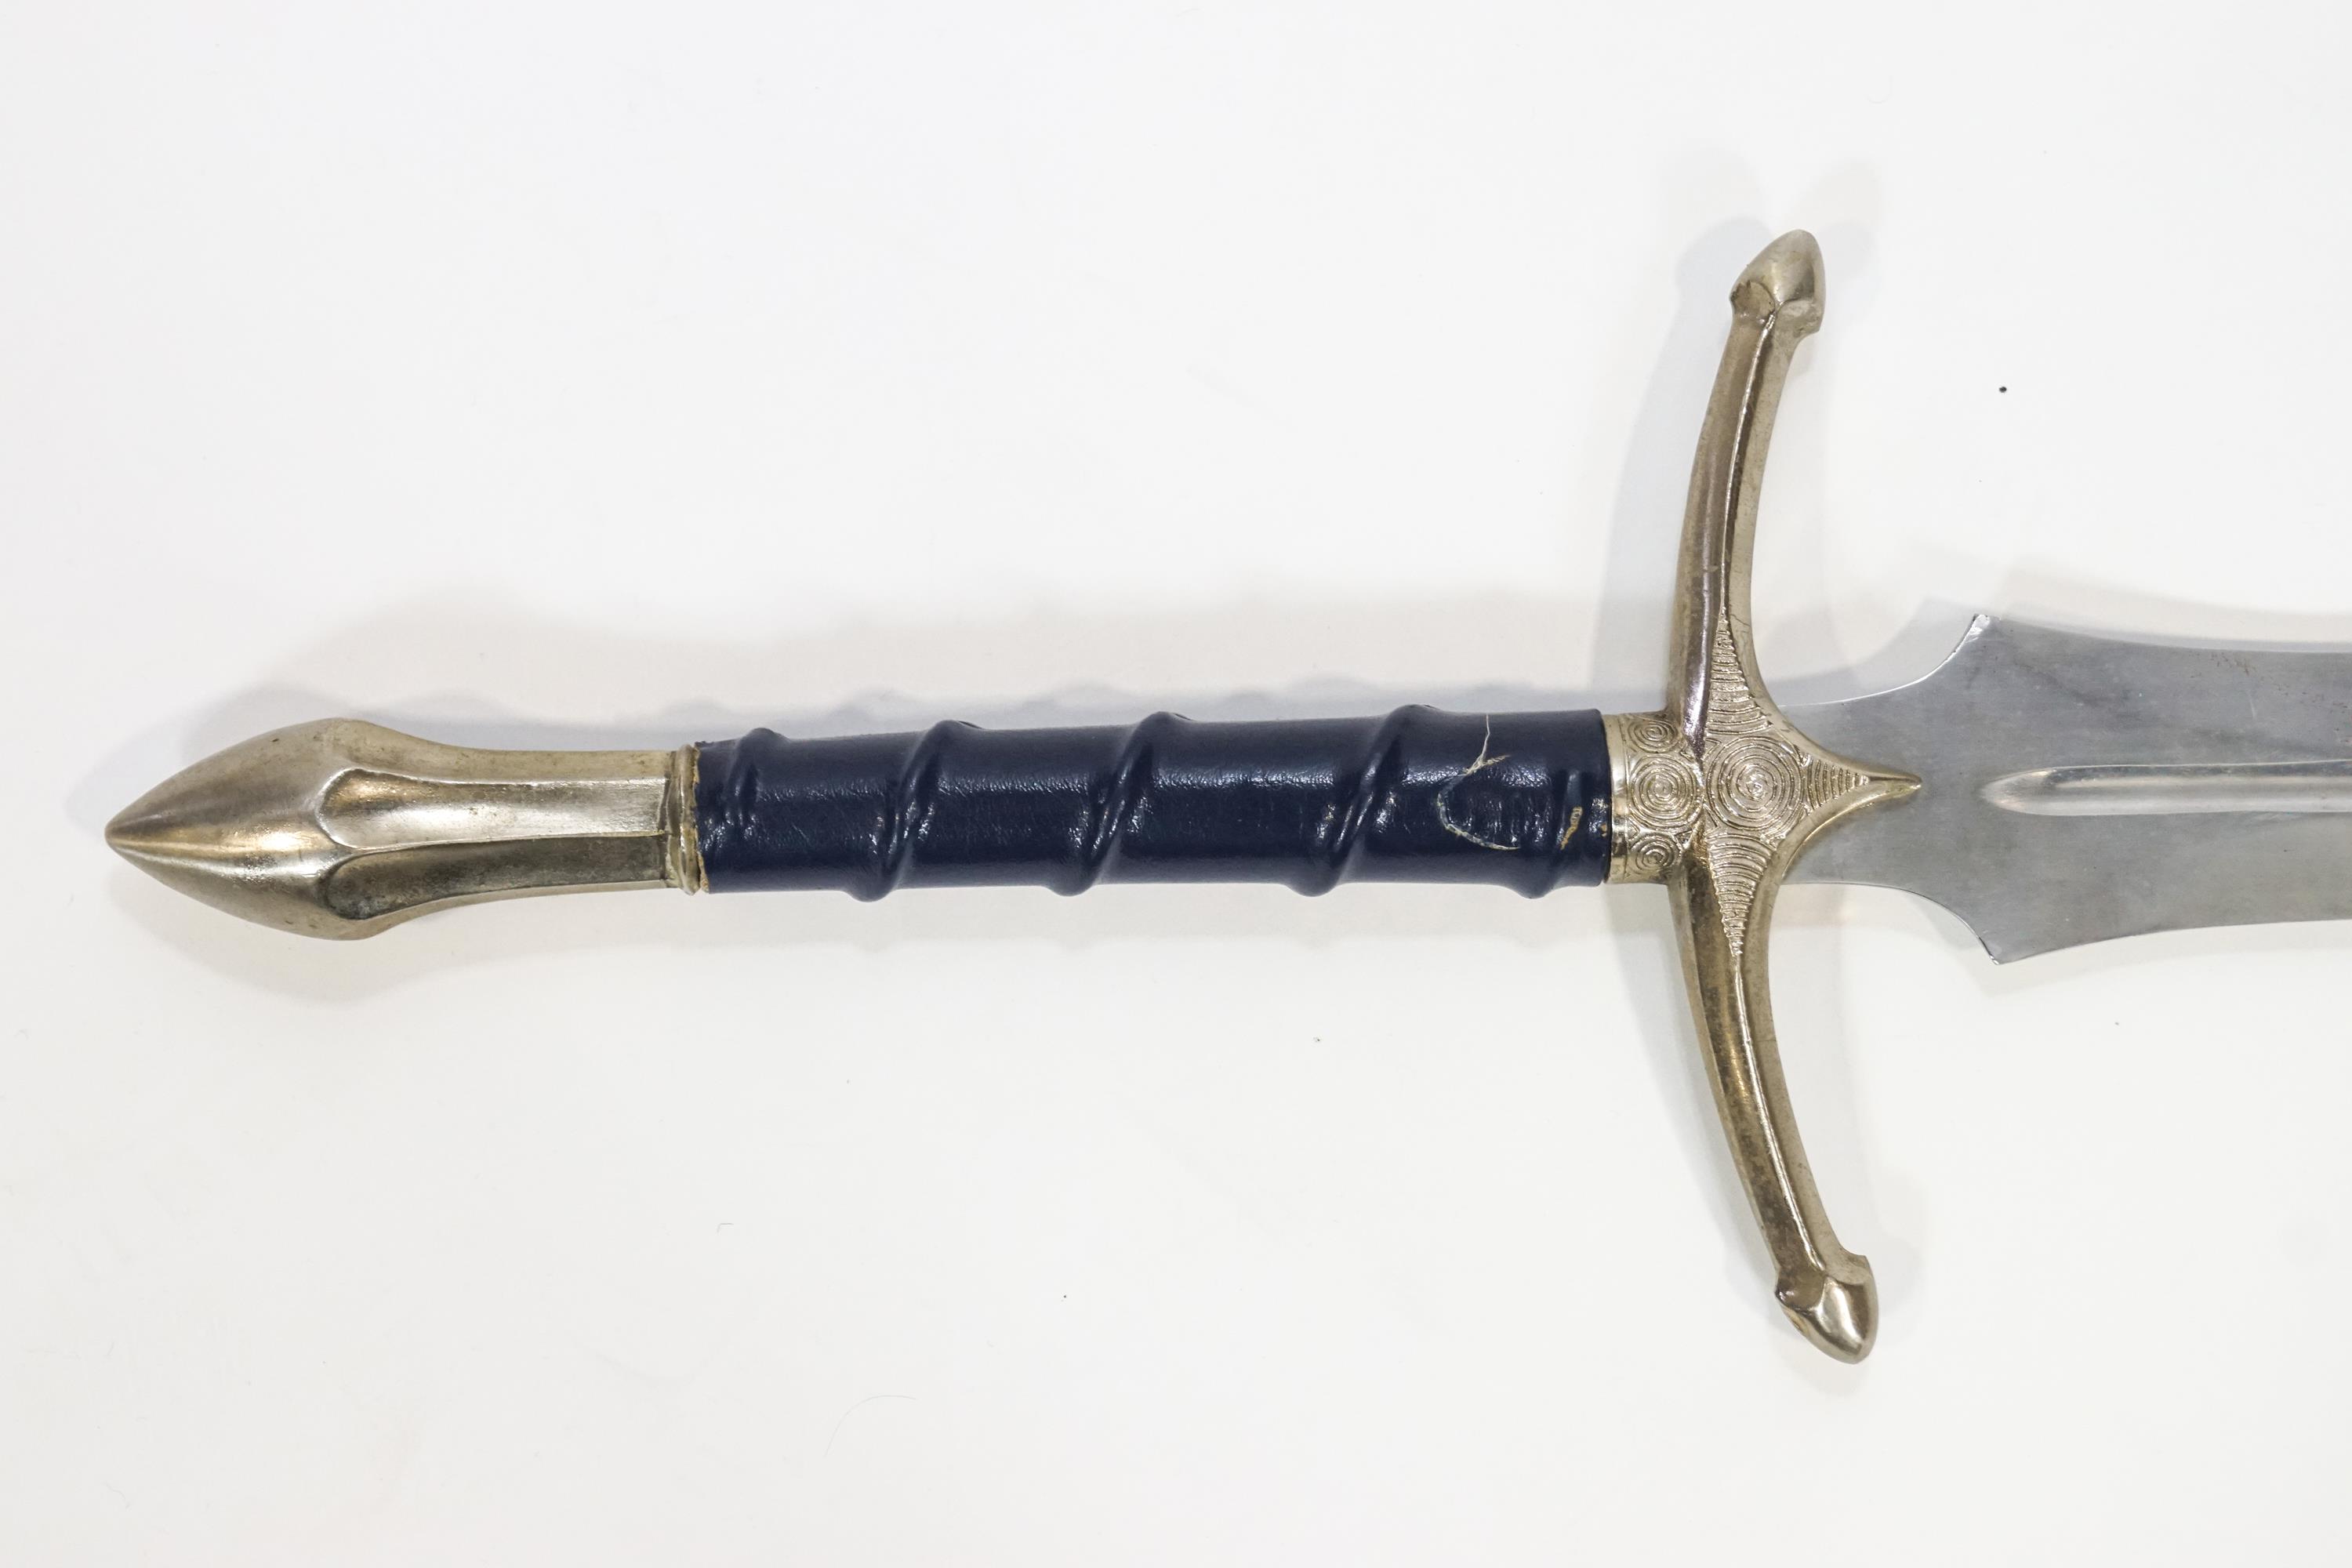 A replica Broadsword, with leather grip, - Image 2 of 2